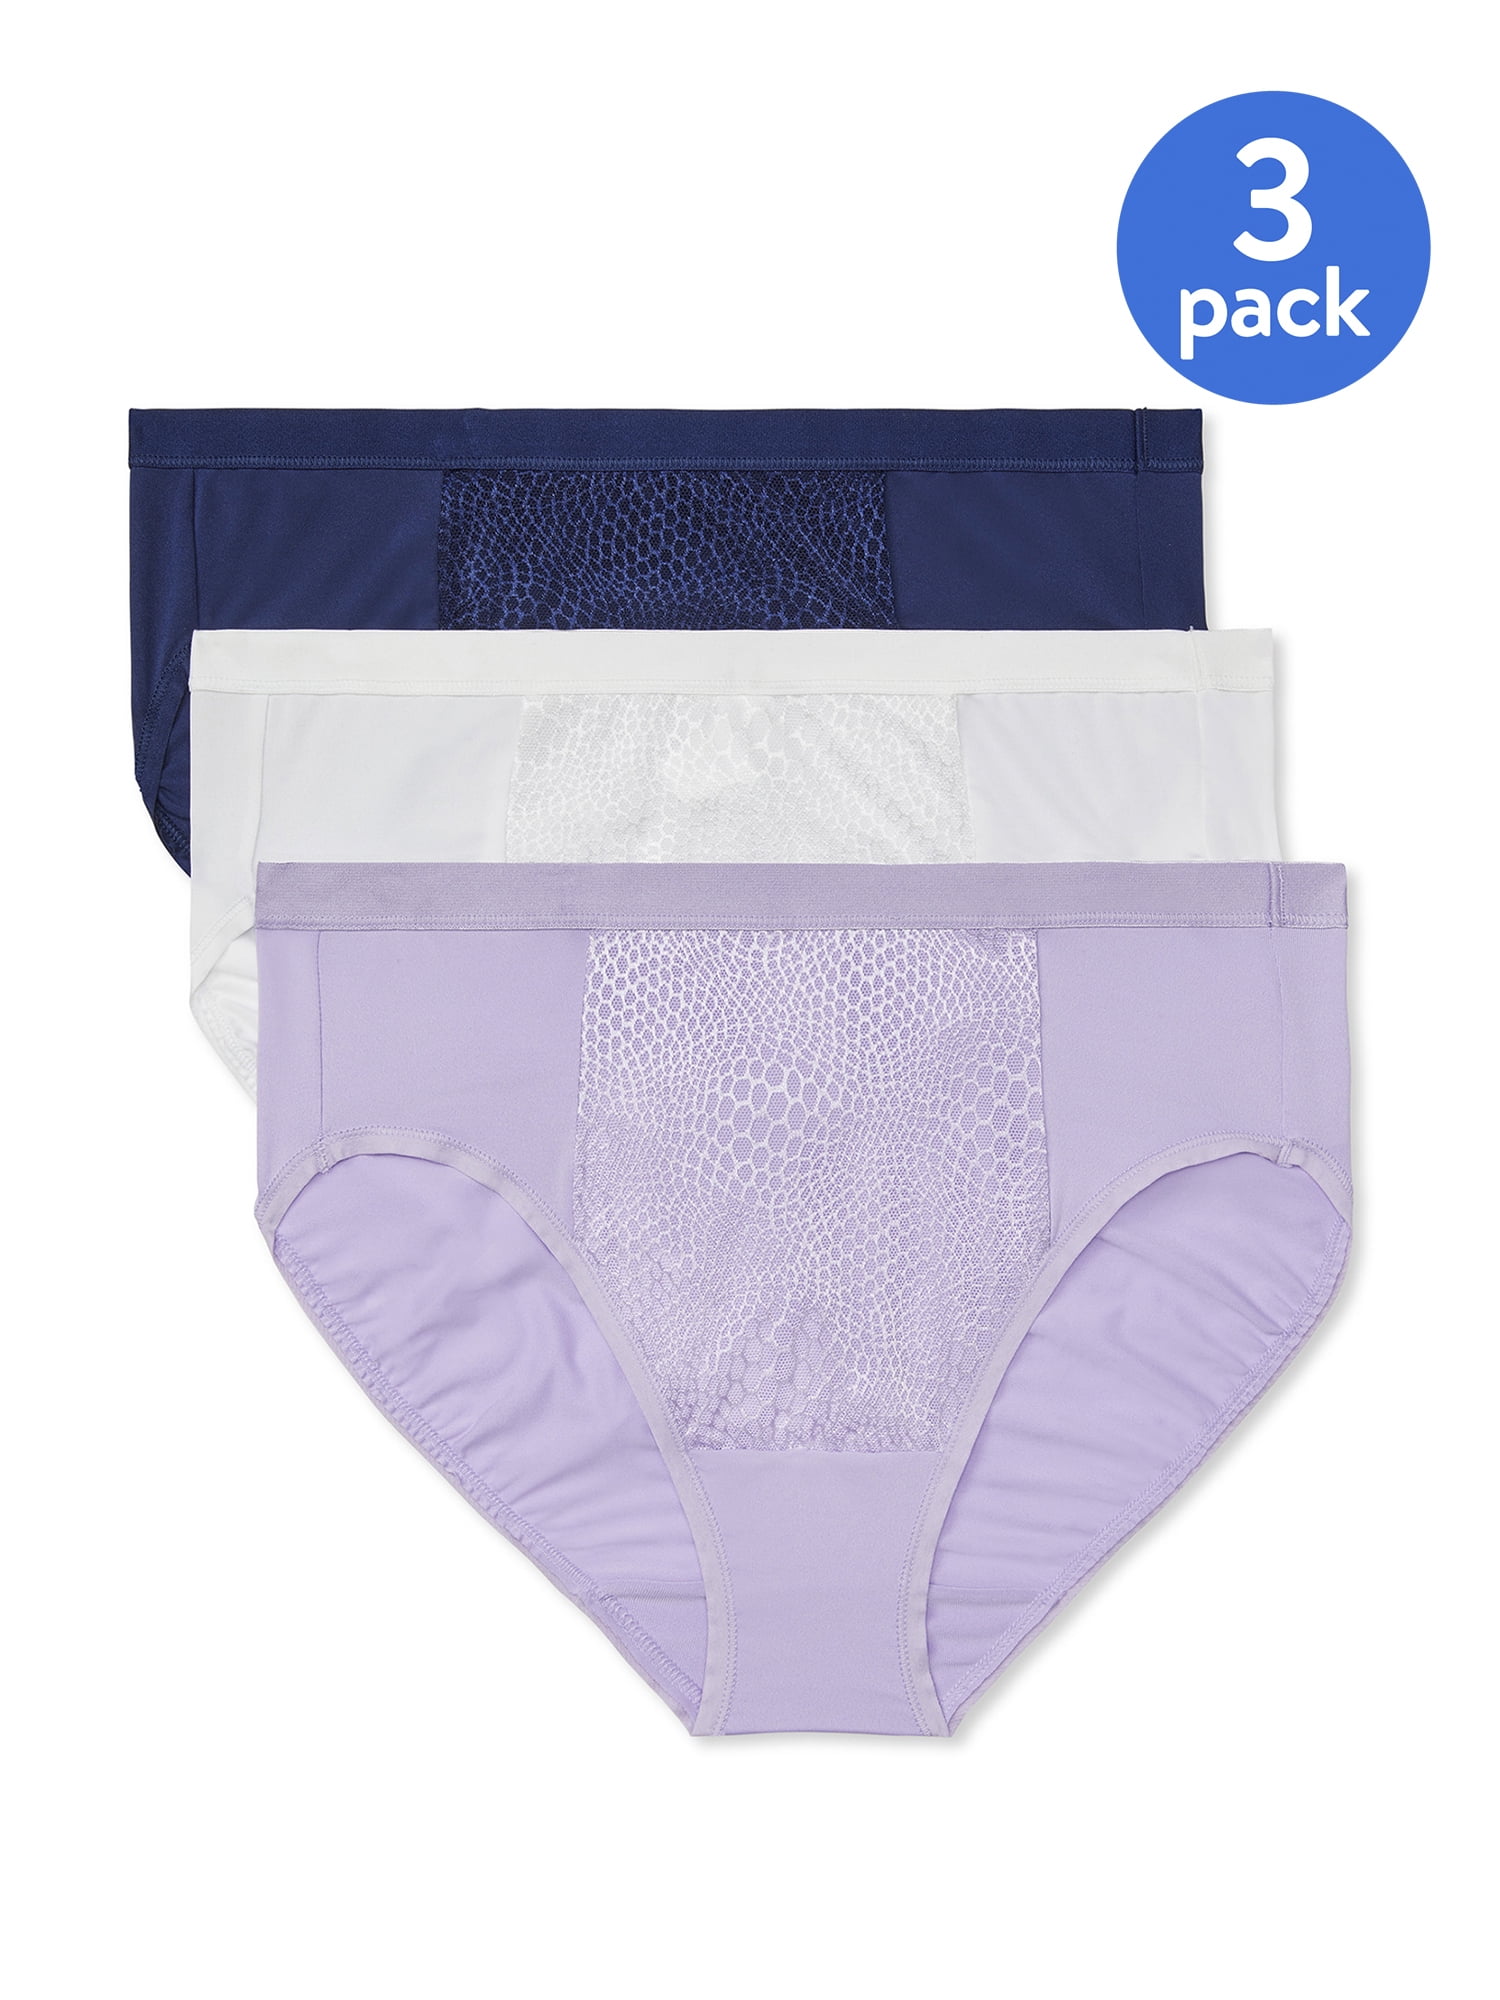 Blissful Benefits by Warner's Women's No Muffin Top Brief Panties, 3 Pack 